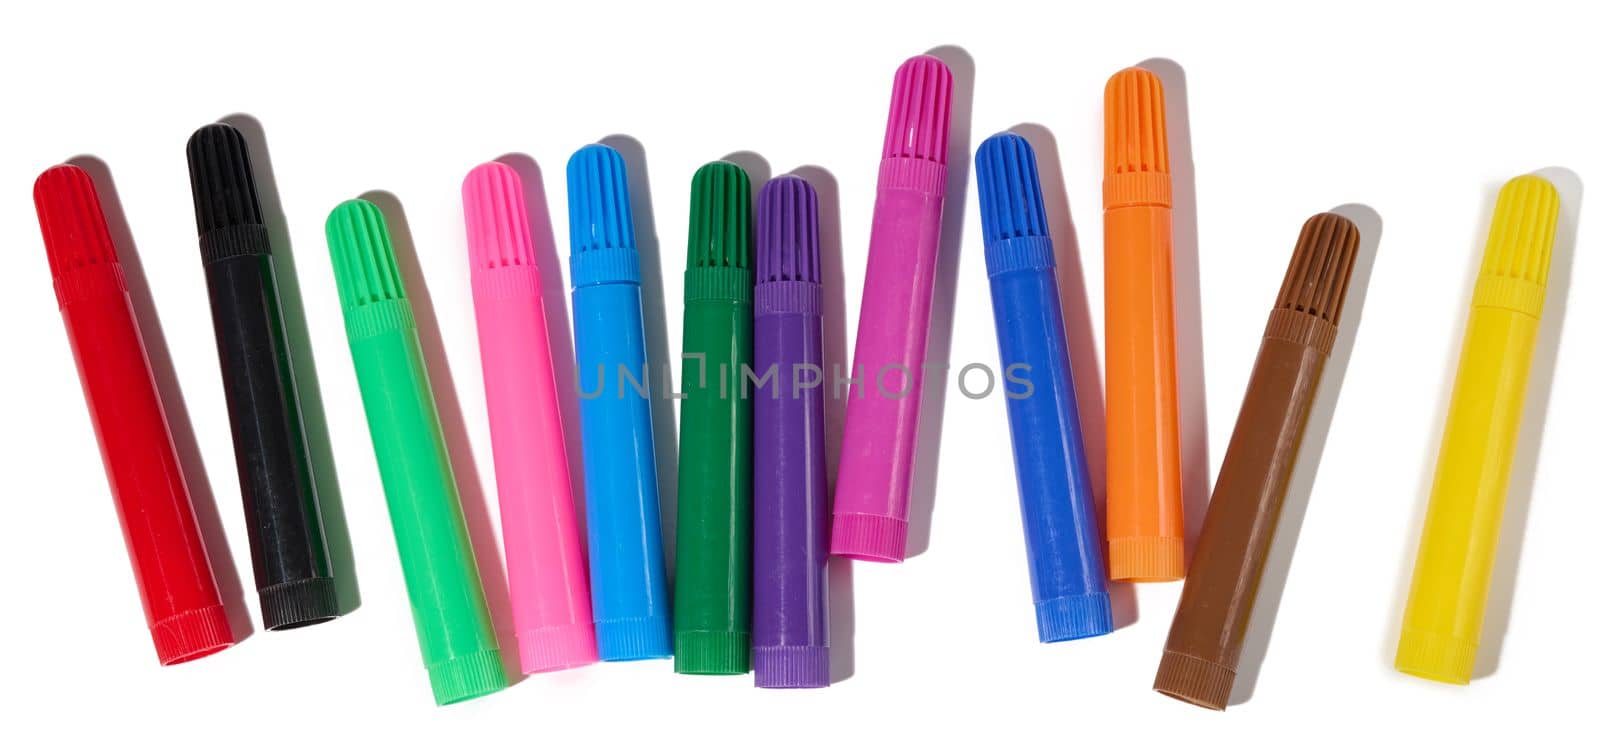 Stack of multicolored felt-tip pens isolated on white background by ndanko